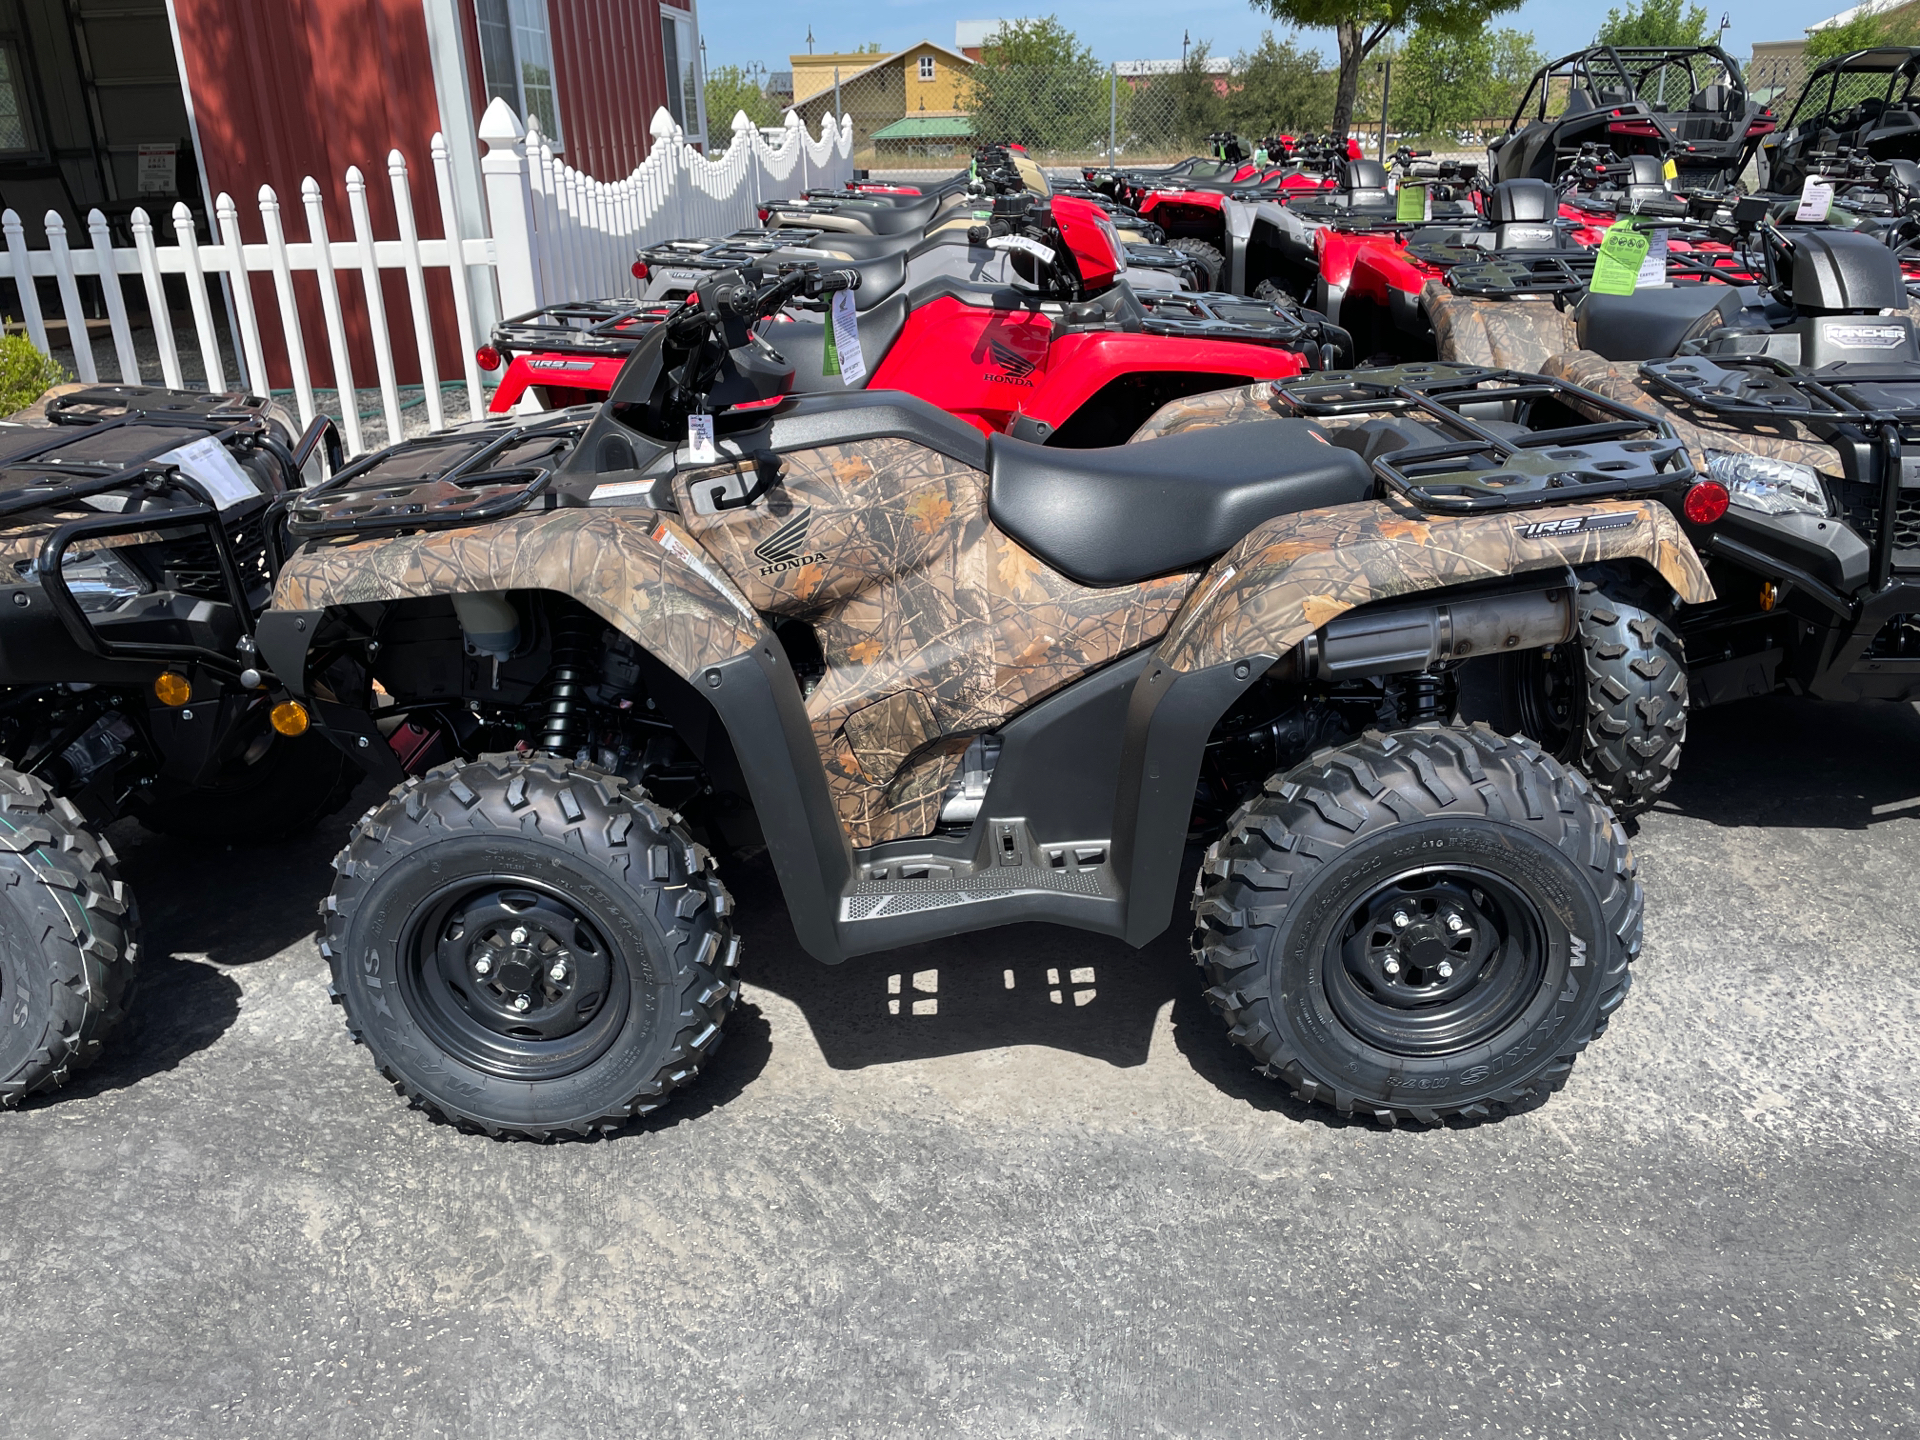 2022 Honda FourTrax Rancher 4x4 Automatic DCT IRS EPS in Paso Robles, California - Photo 1